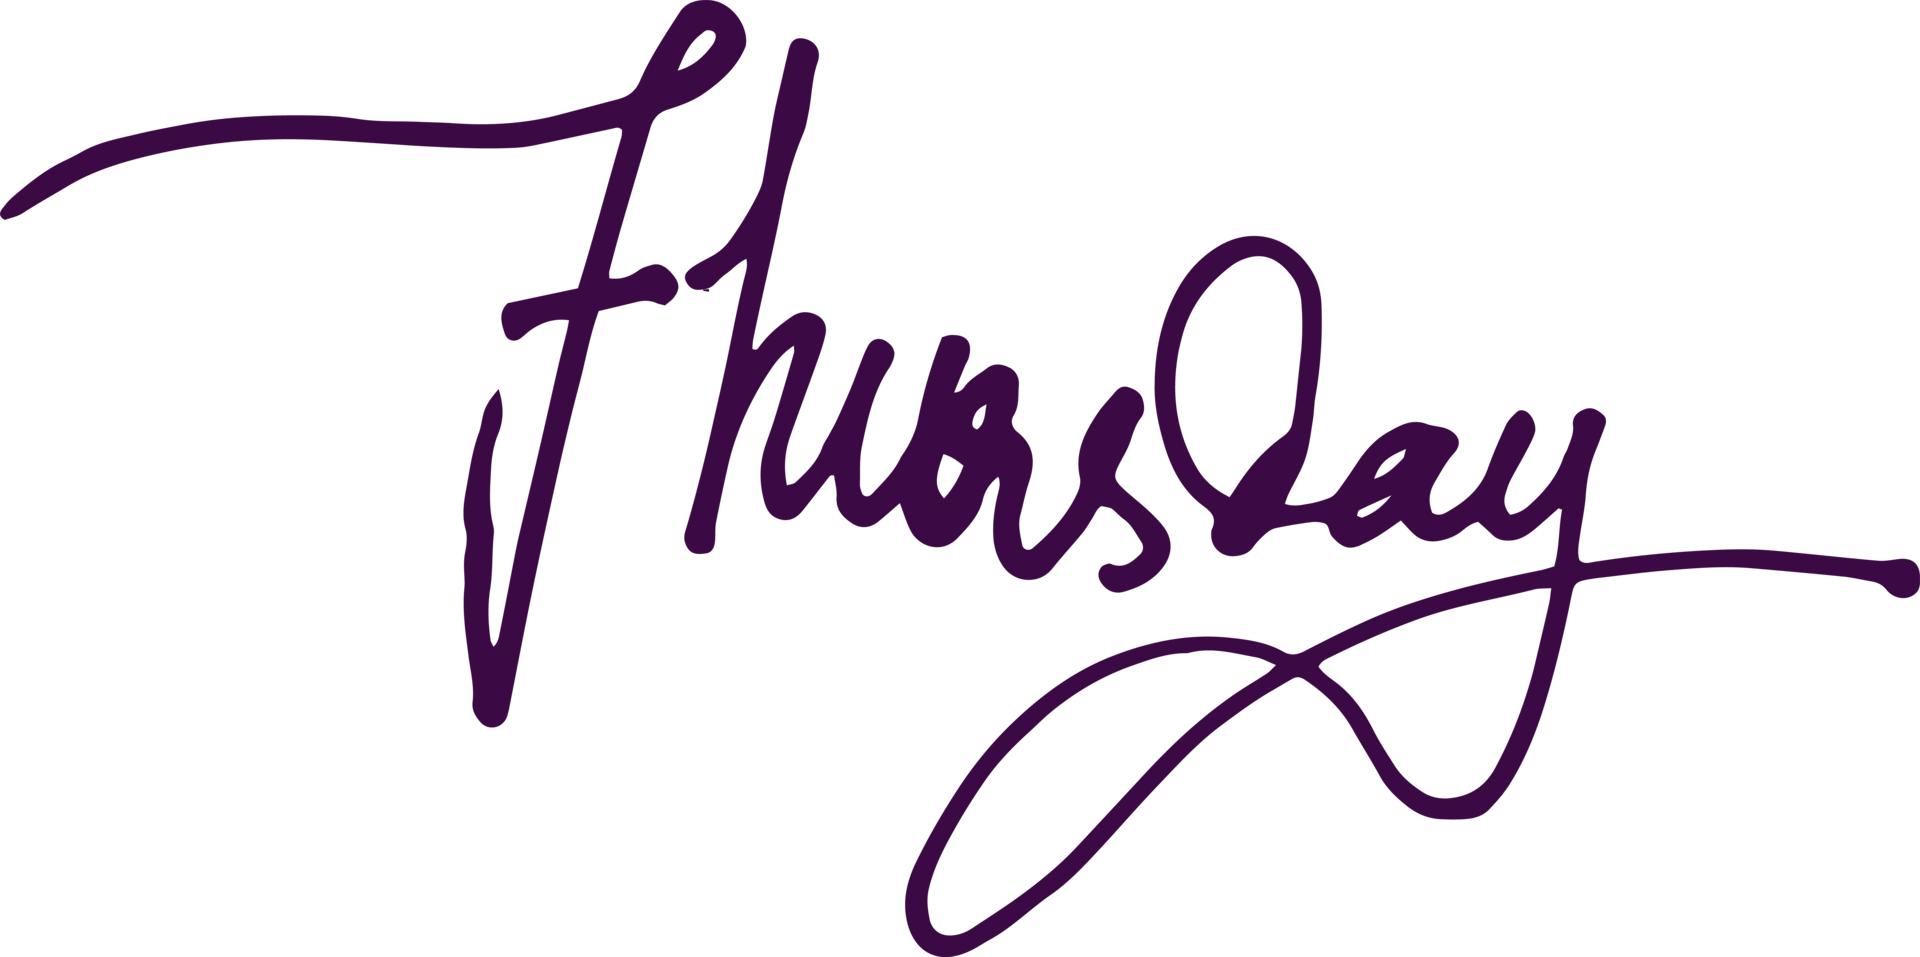 Thursday, cute day text lettering for weekly planners png